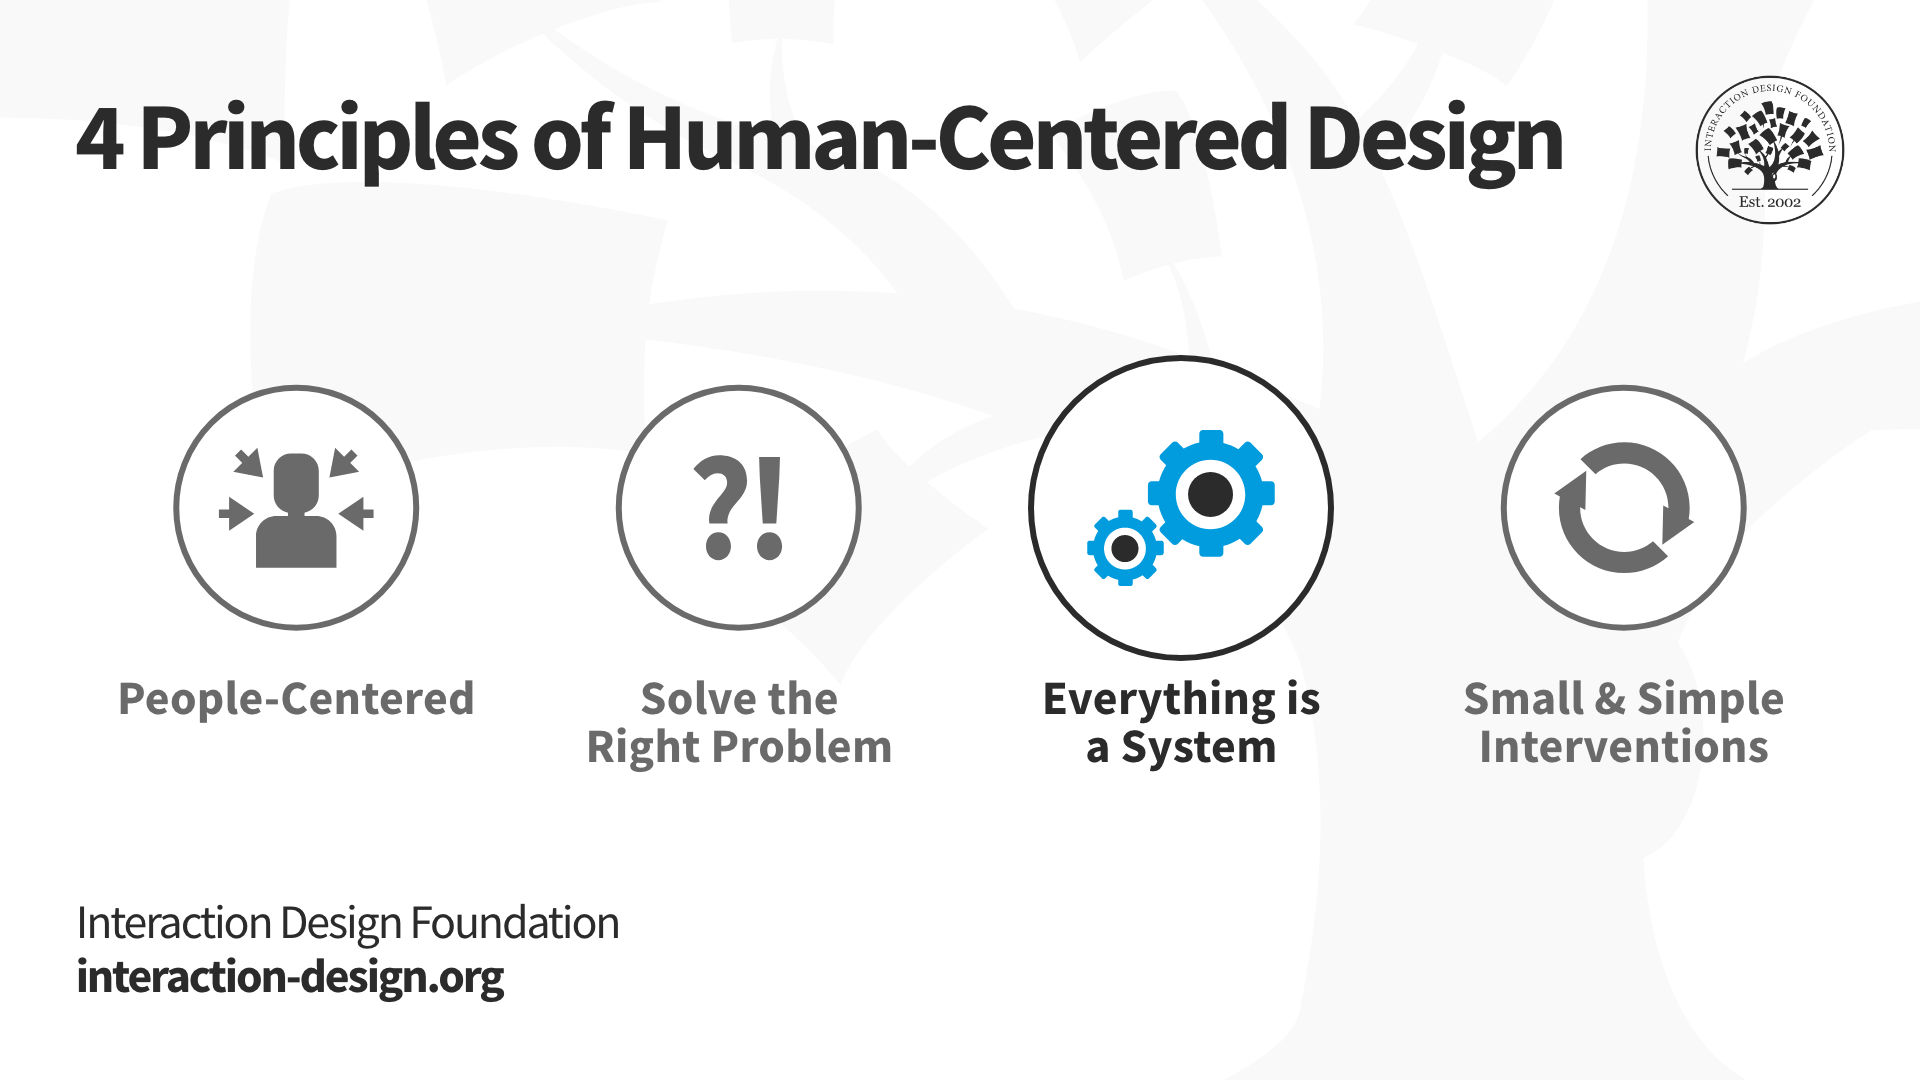 Systems thinking is the third principle of Human-Centered Design. The other principles are Peopl-Centered, Solve the Right Problem, and Small & Simple Interventions.